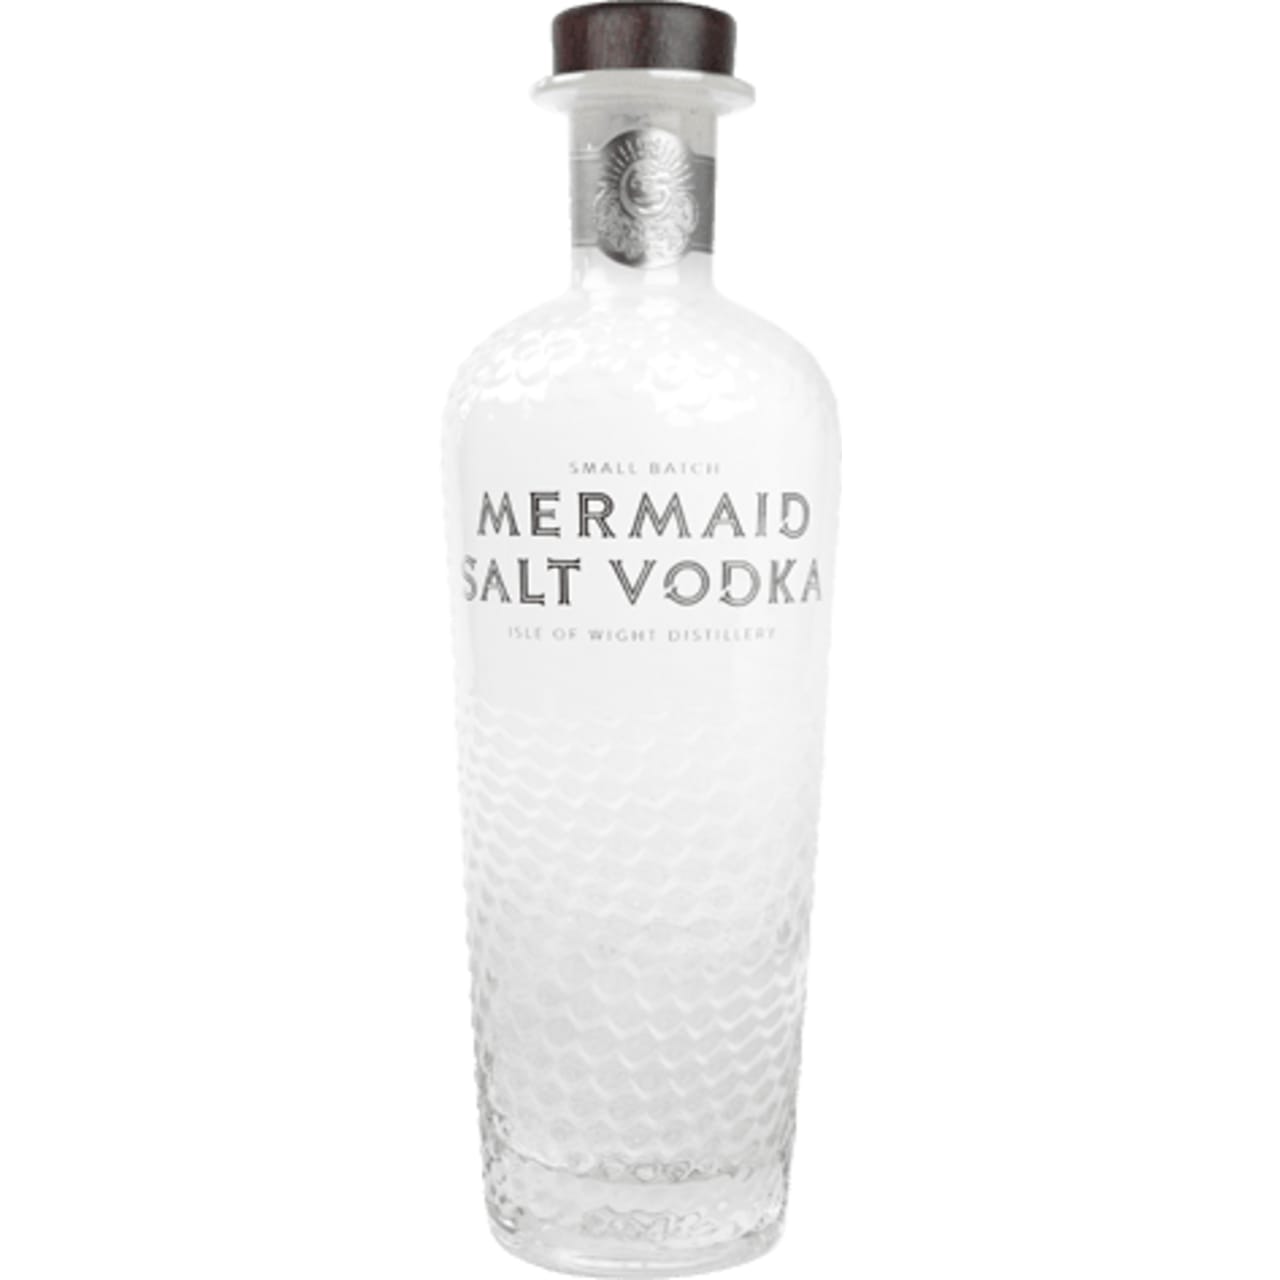 Clean, smooth Mermaid vodka with a touch of sea salt which transforms cocktails and lifts the flavours. The stunning bottle is mindfully crafted from recyclable glass, a sustainably sourced natural cork stopper and compostable seal.